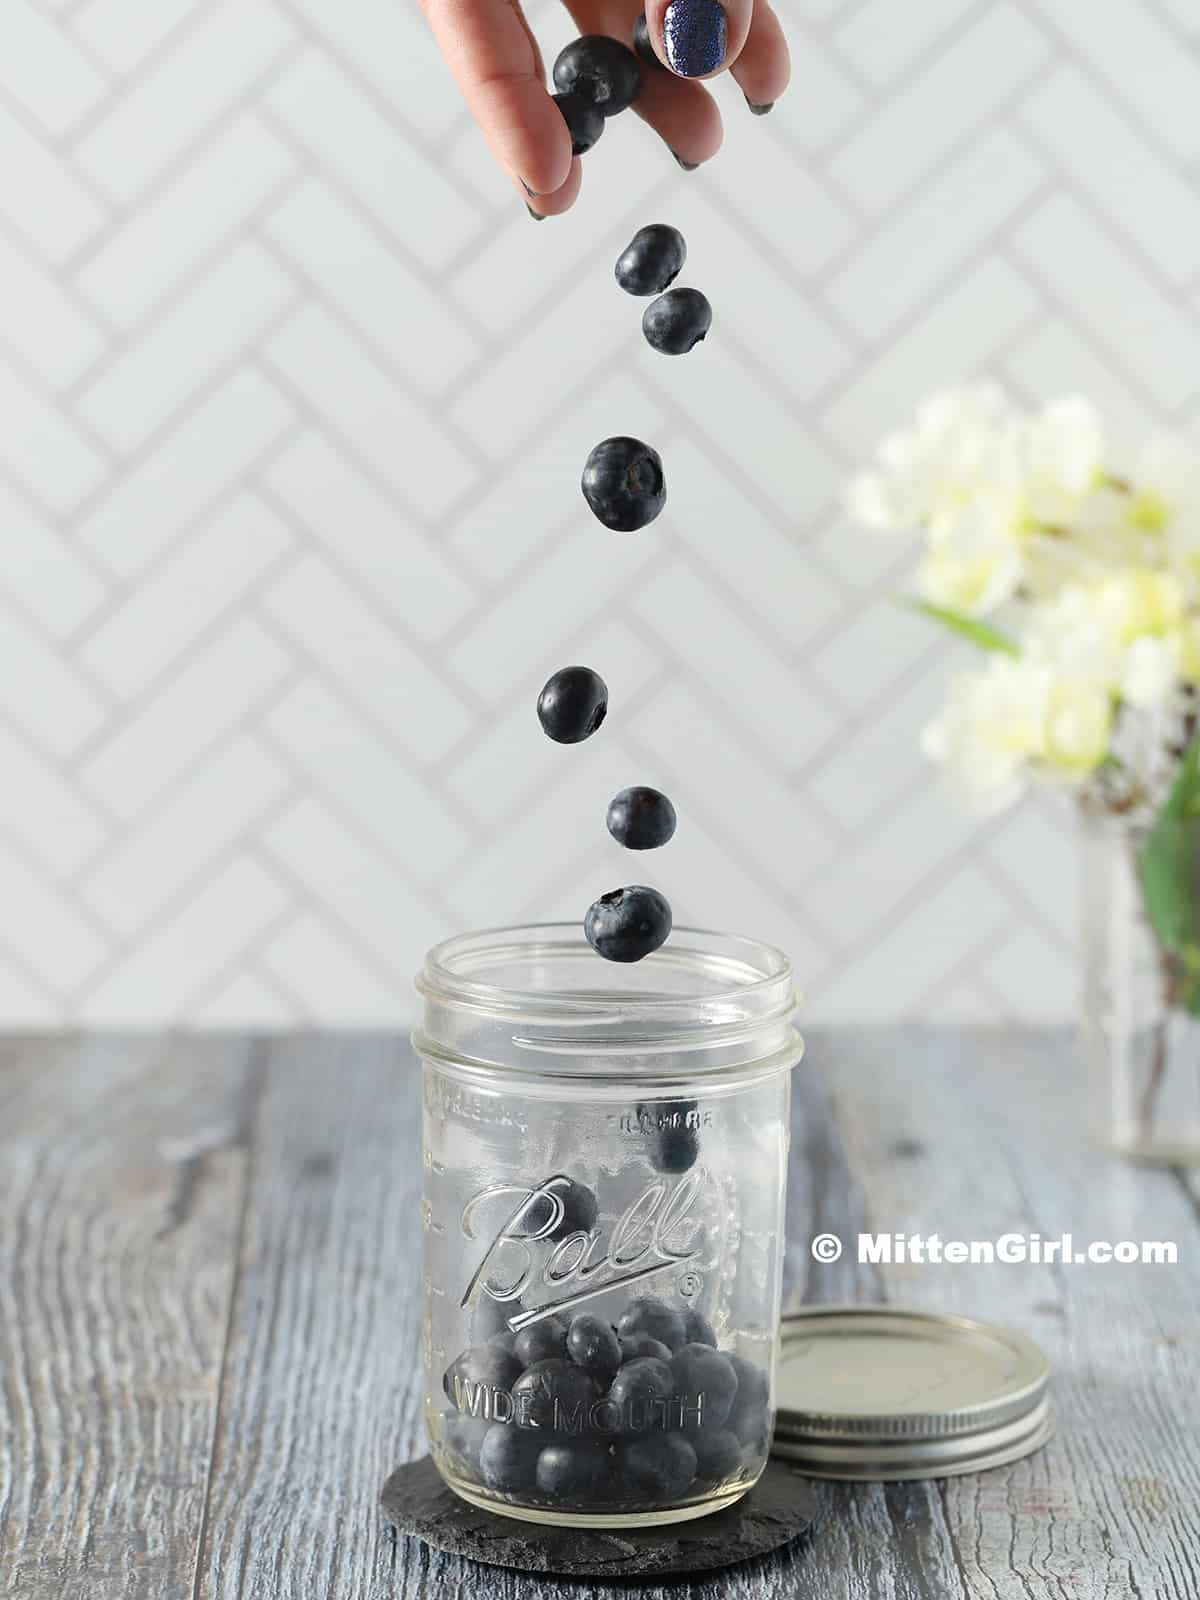 Blueberries falling into a pint jar.